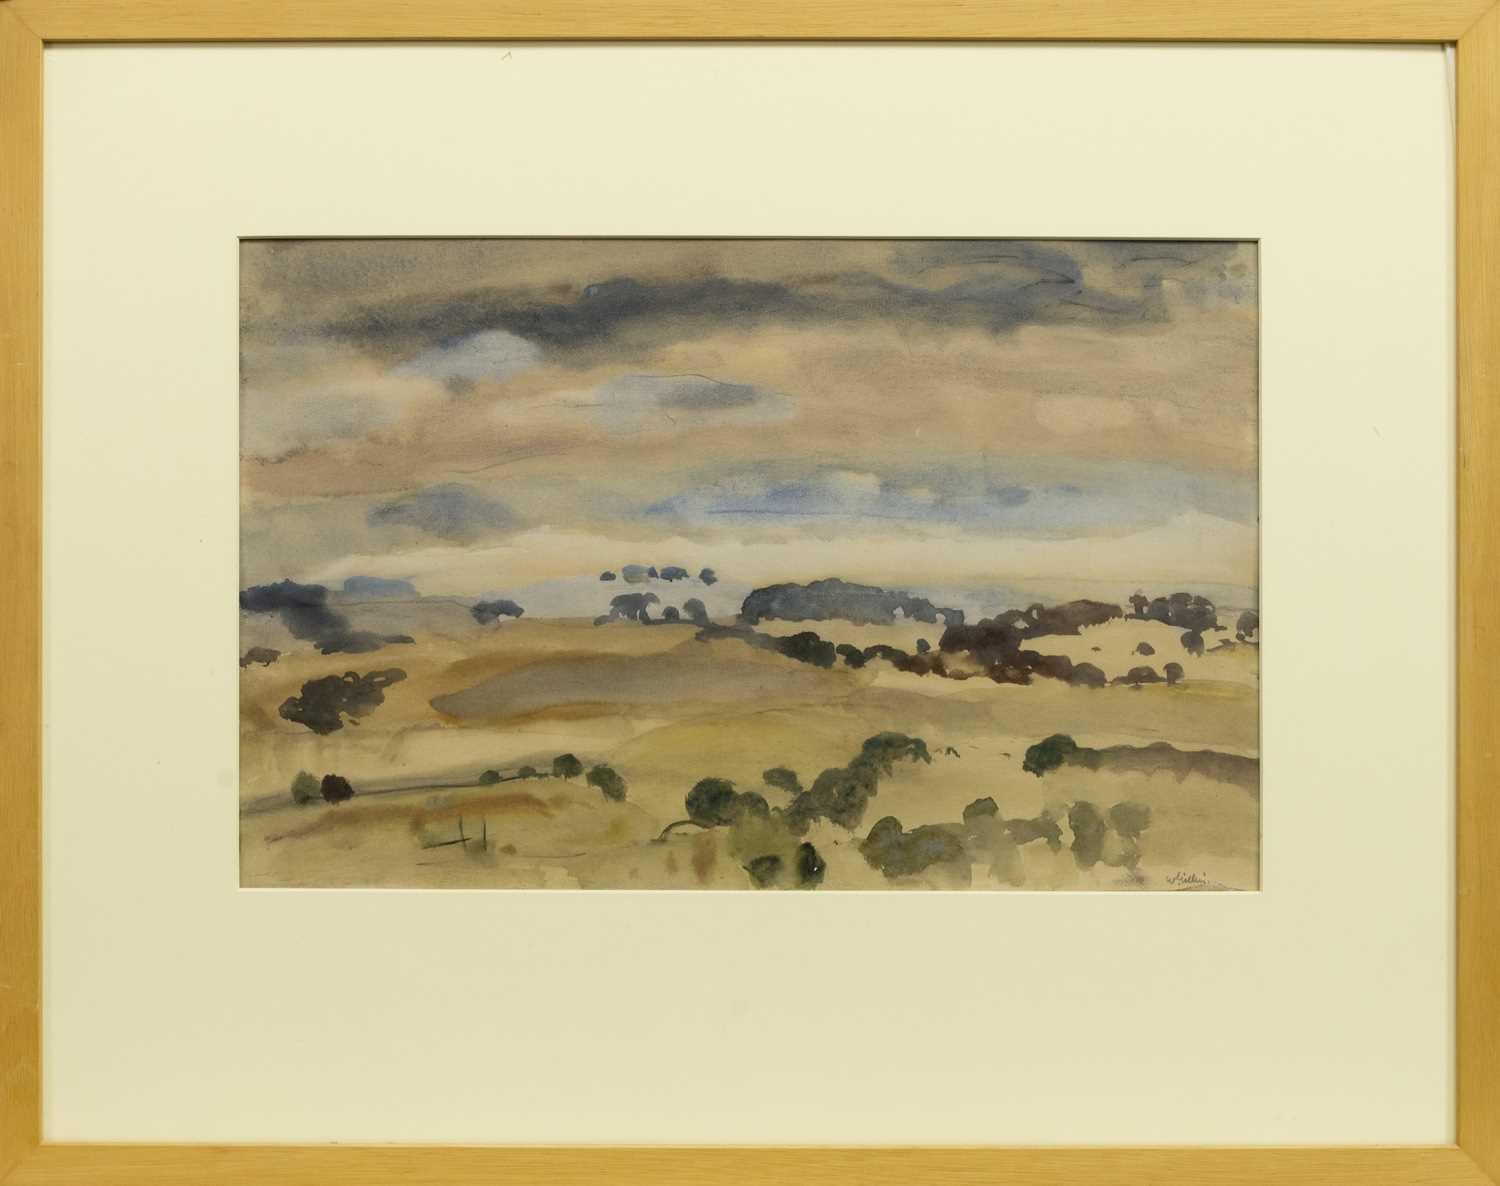 Lot 707 - GALLOWAY LANDSCAPE, A WATERCOLOUR BY SIR WILLIAM GEORGE GILLIES